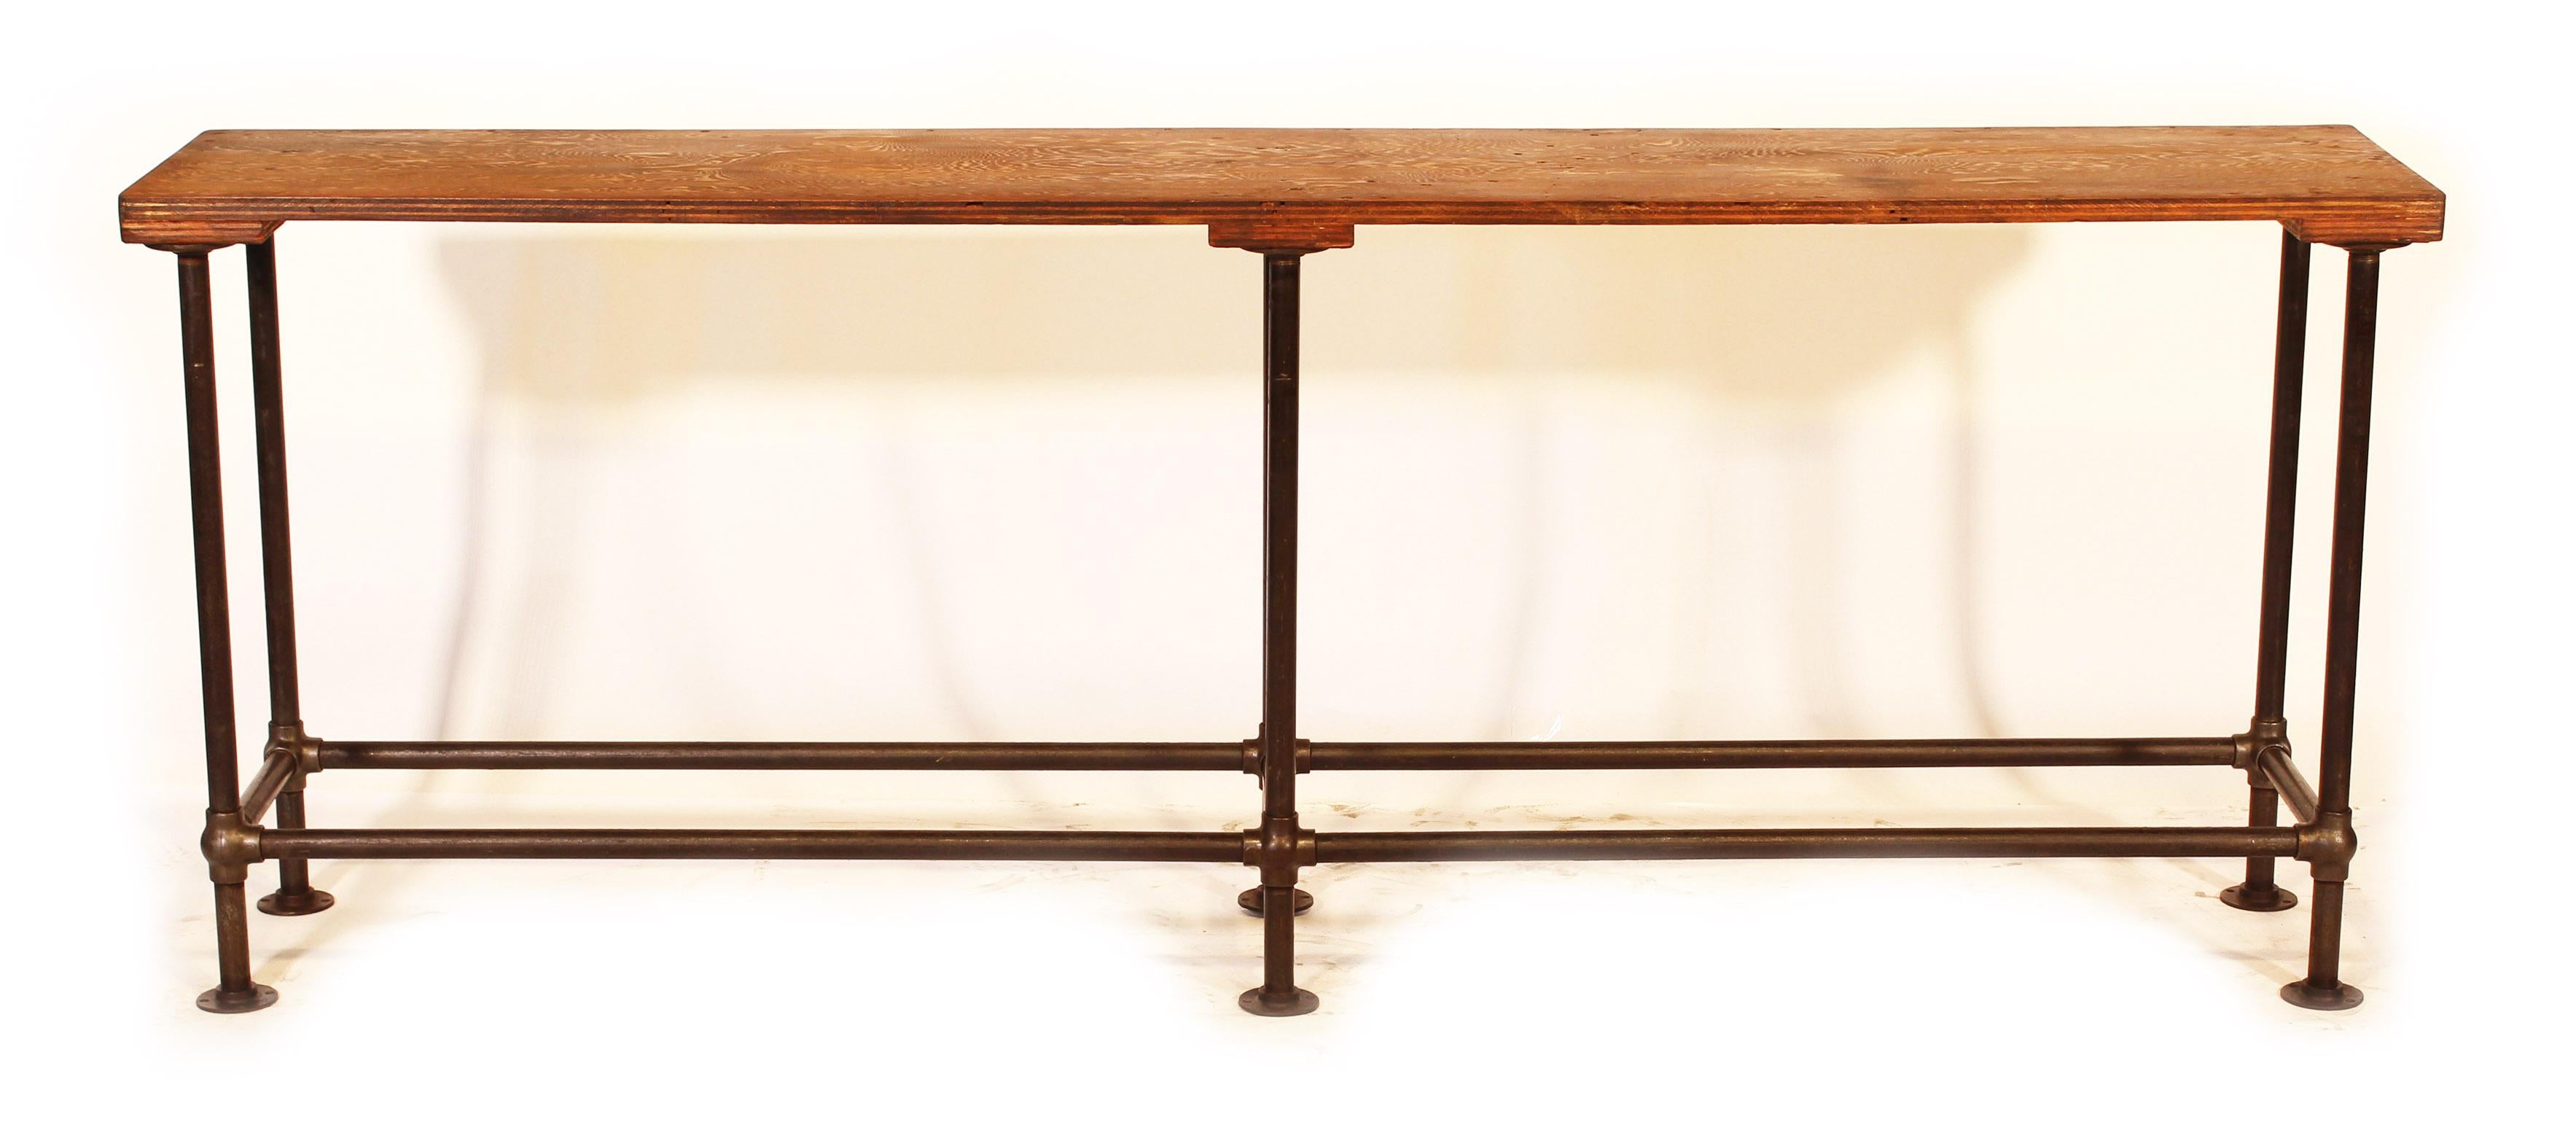 Vintage Industrial display / sofa table made from plywood, steel and cast iron, circa 1940s, as the joints are cast iron 